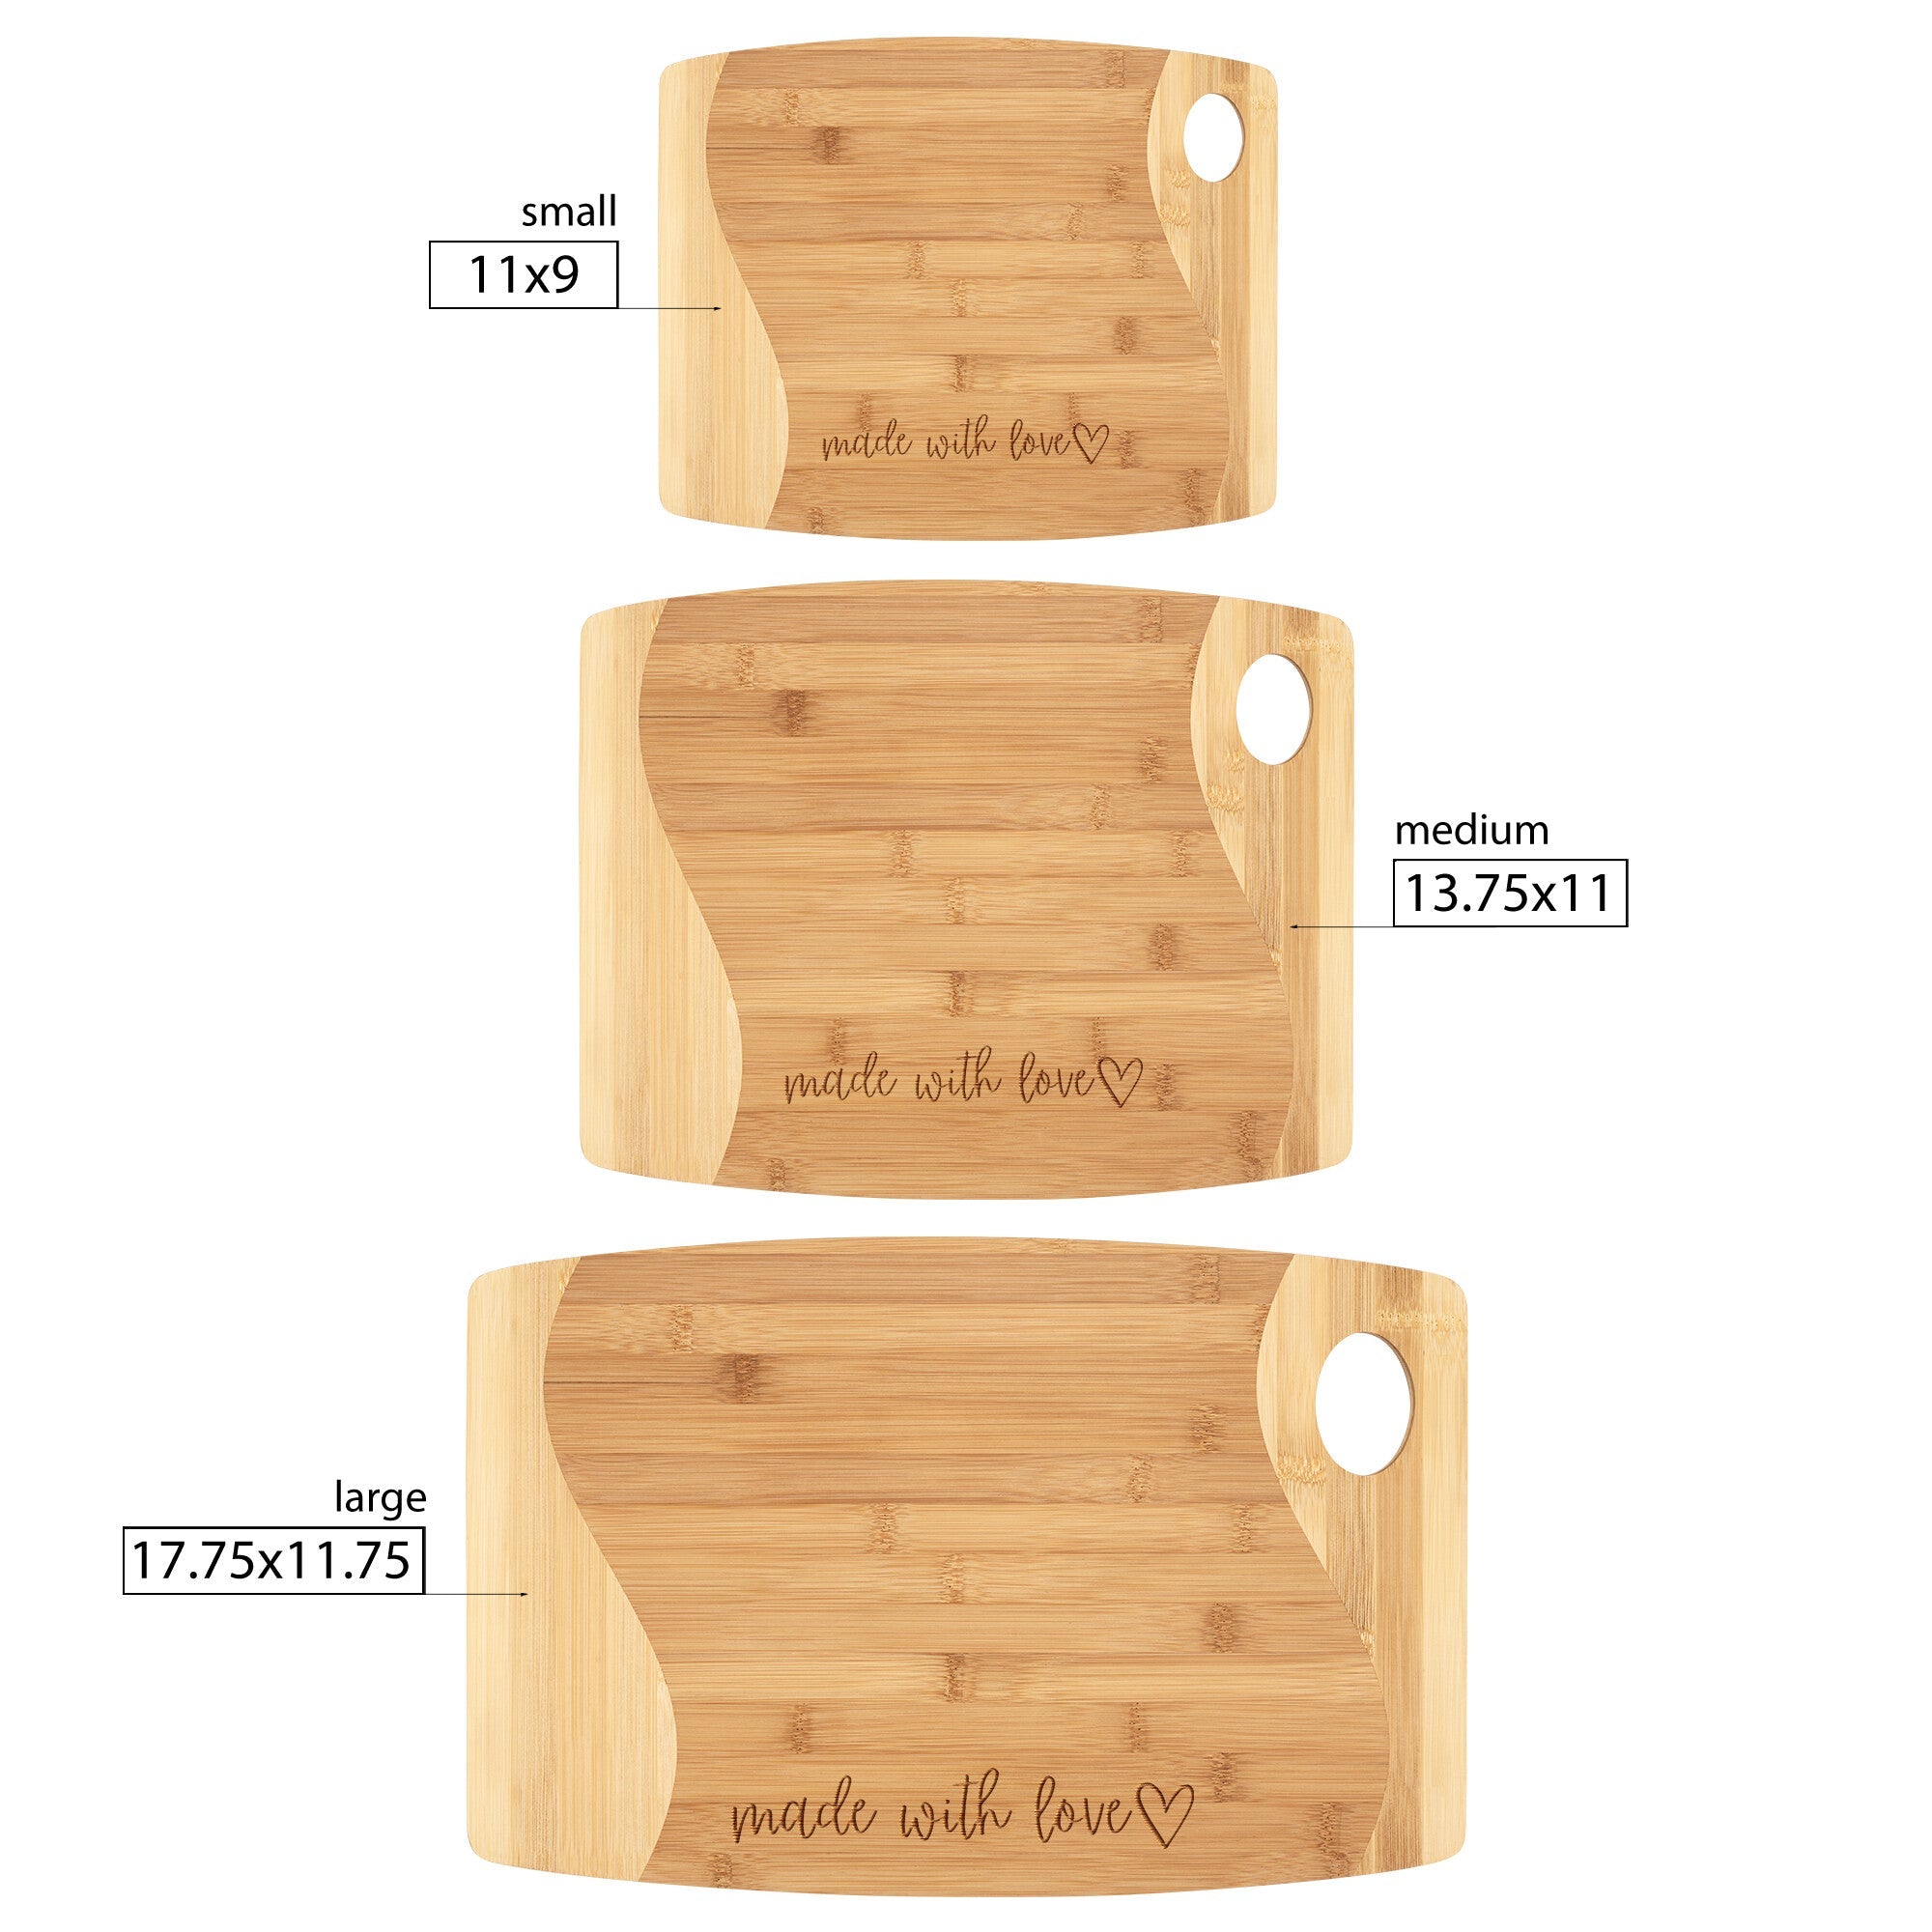 Made with Love Bamboo Cutting Board - The Kindness Cause